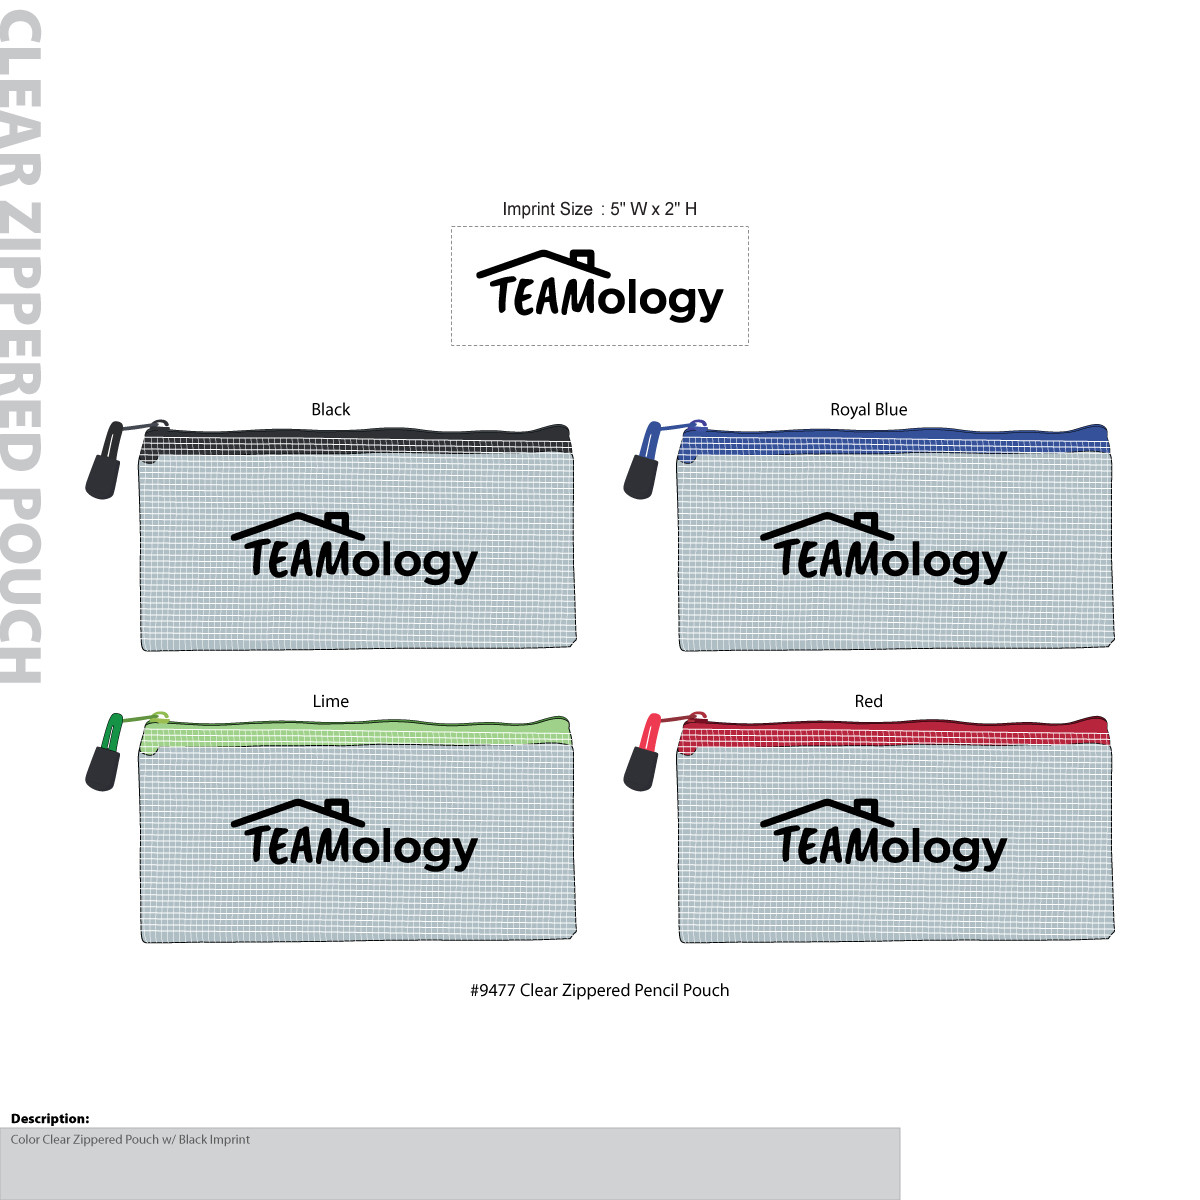 Clear Zippered Pouch - Teamology